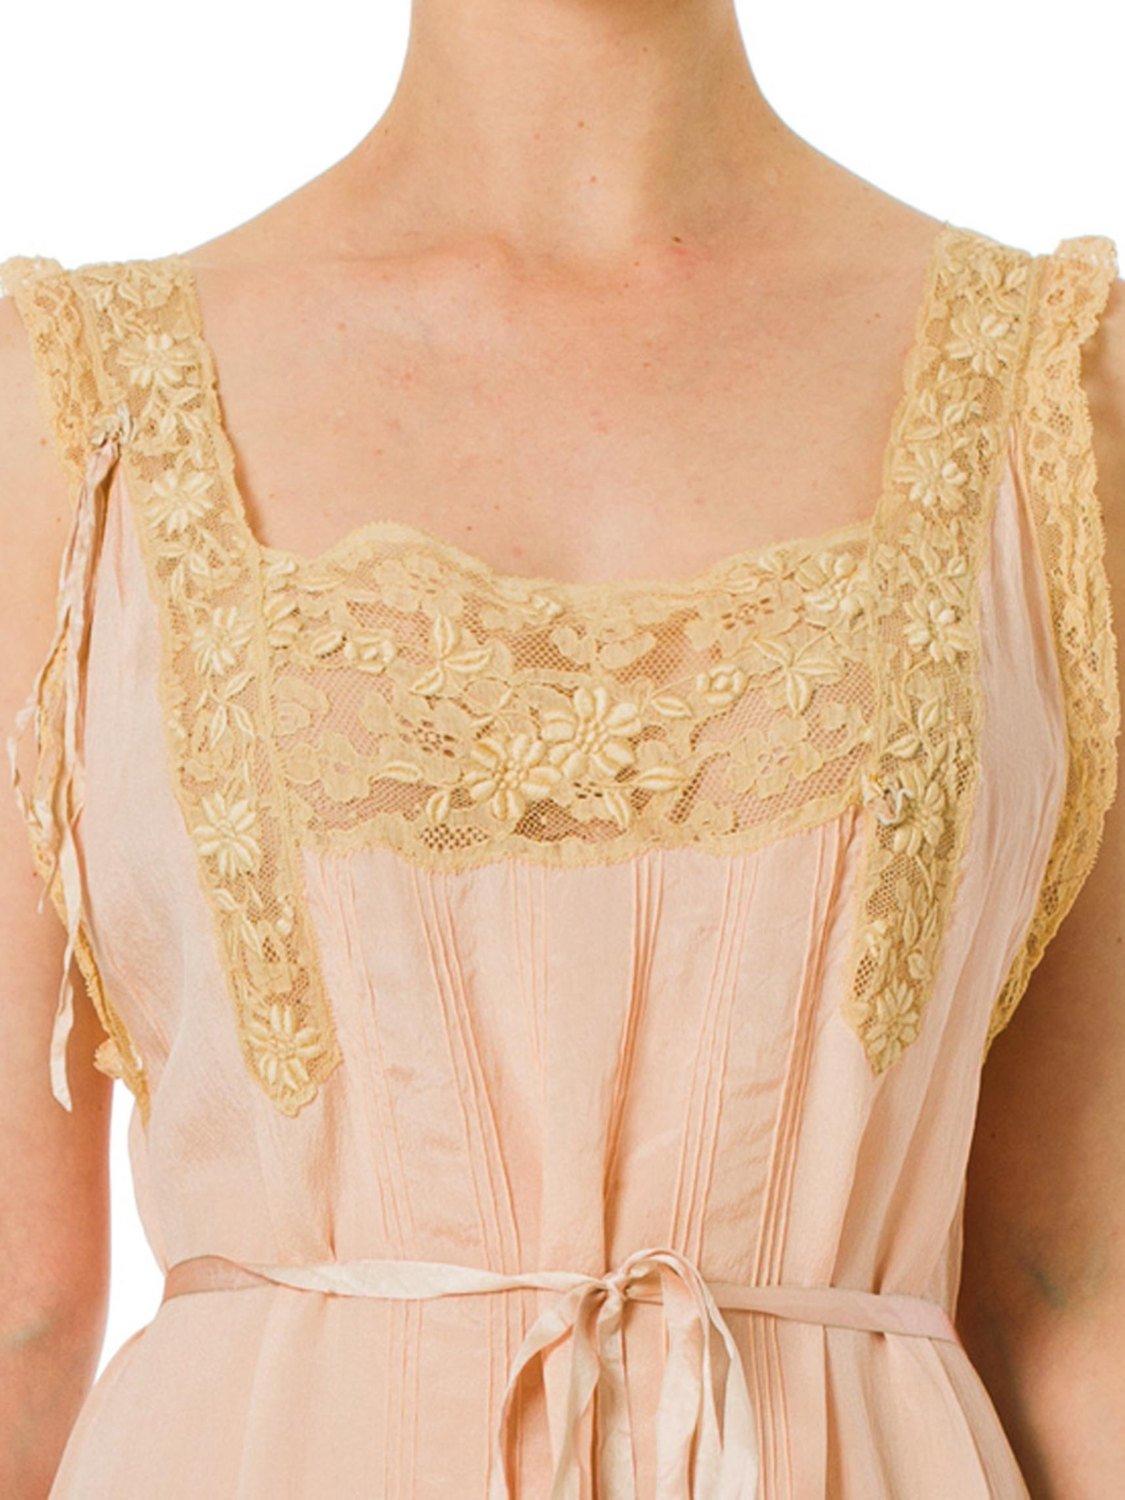 Women's 1920S Blush Pink Silk & Lace Negligee With Floral Embroidery Pin Tucks